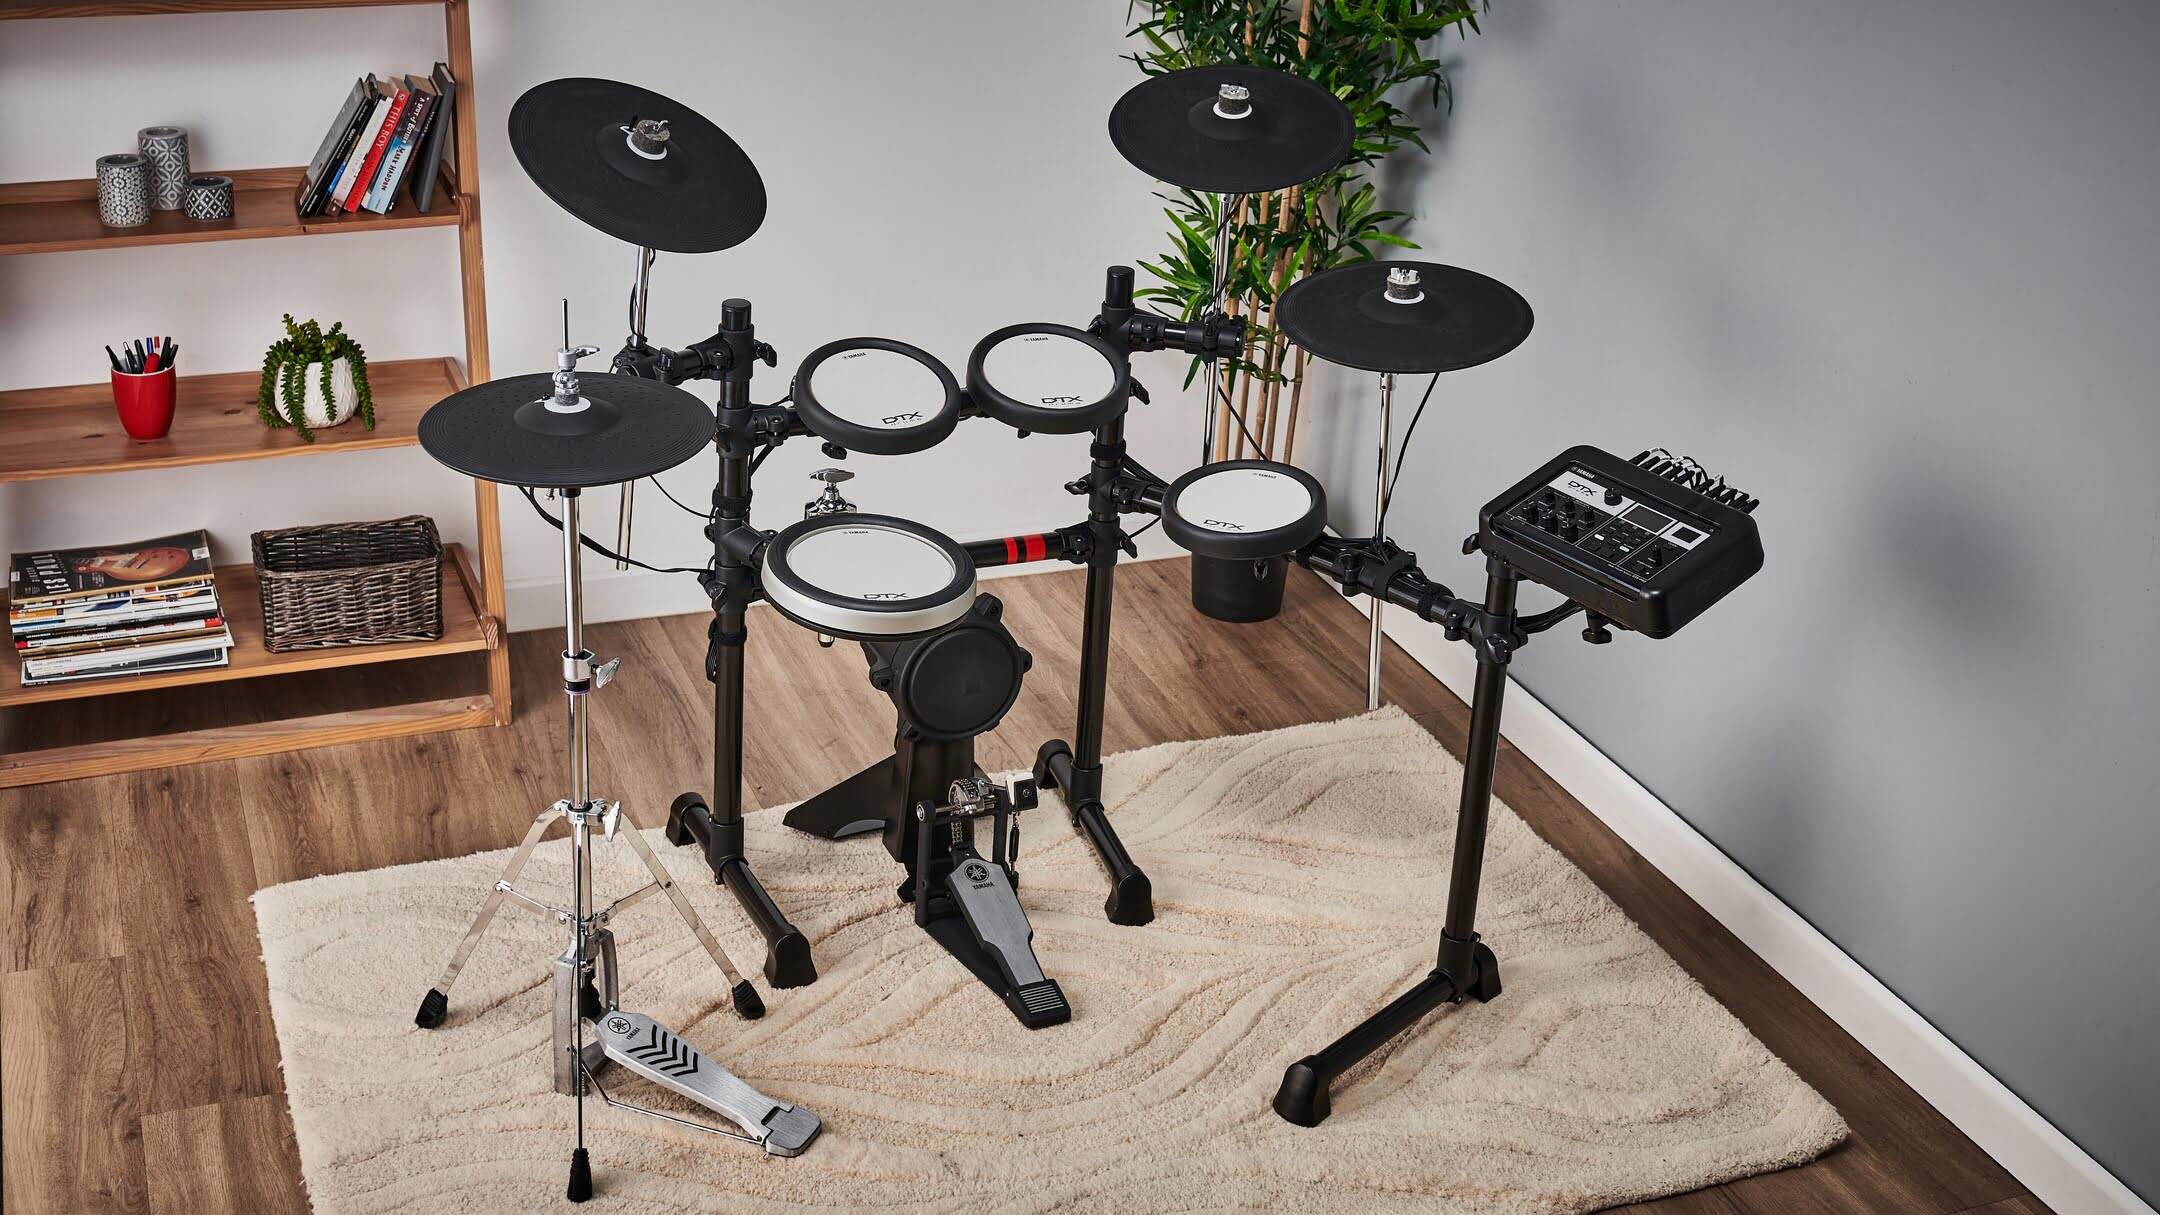 Electric Drum Set Review: Unbiased Analysis and Recommendations